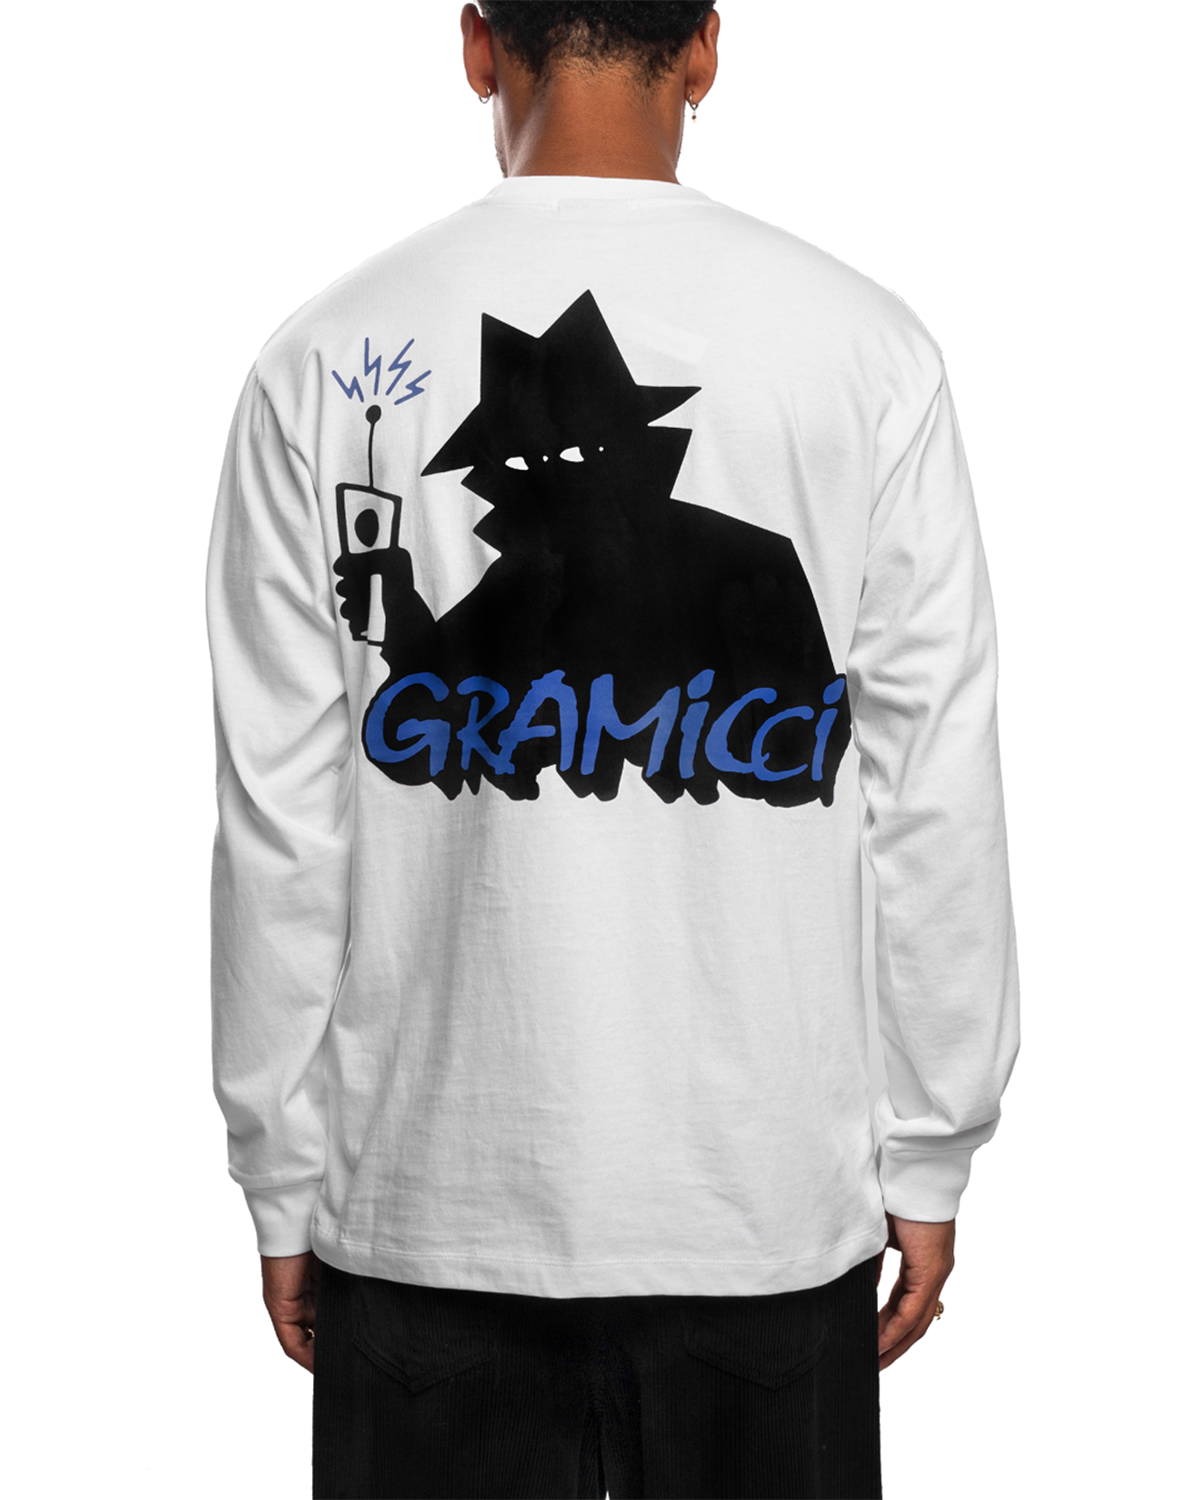 Real Bad Man + Gramicci Dude L/S Tee 'White' – Limited Edt